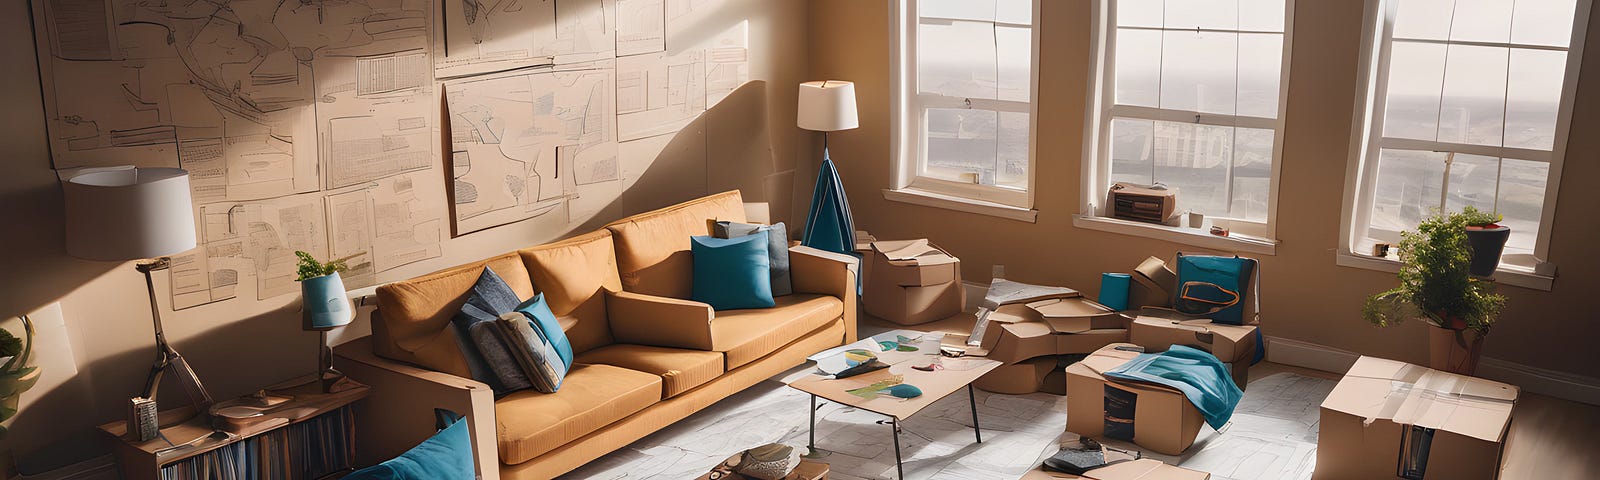 A living room with cardboard runways and boxed arranged like an airport.